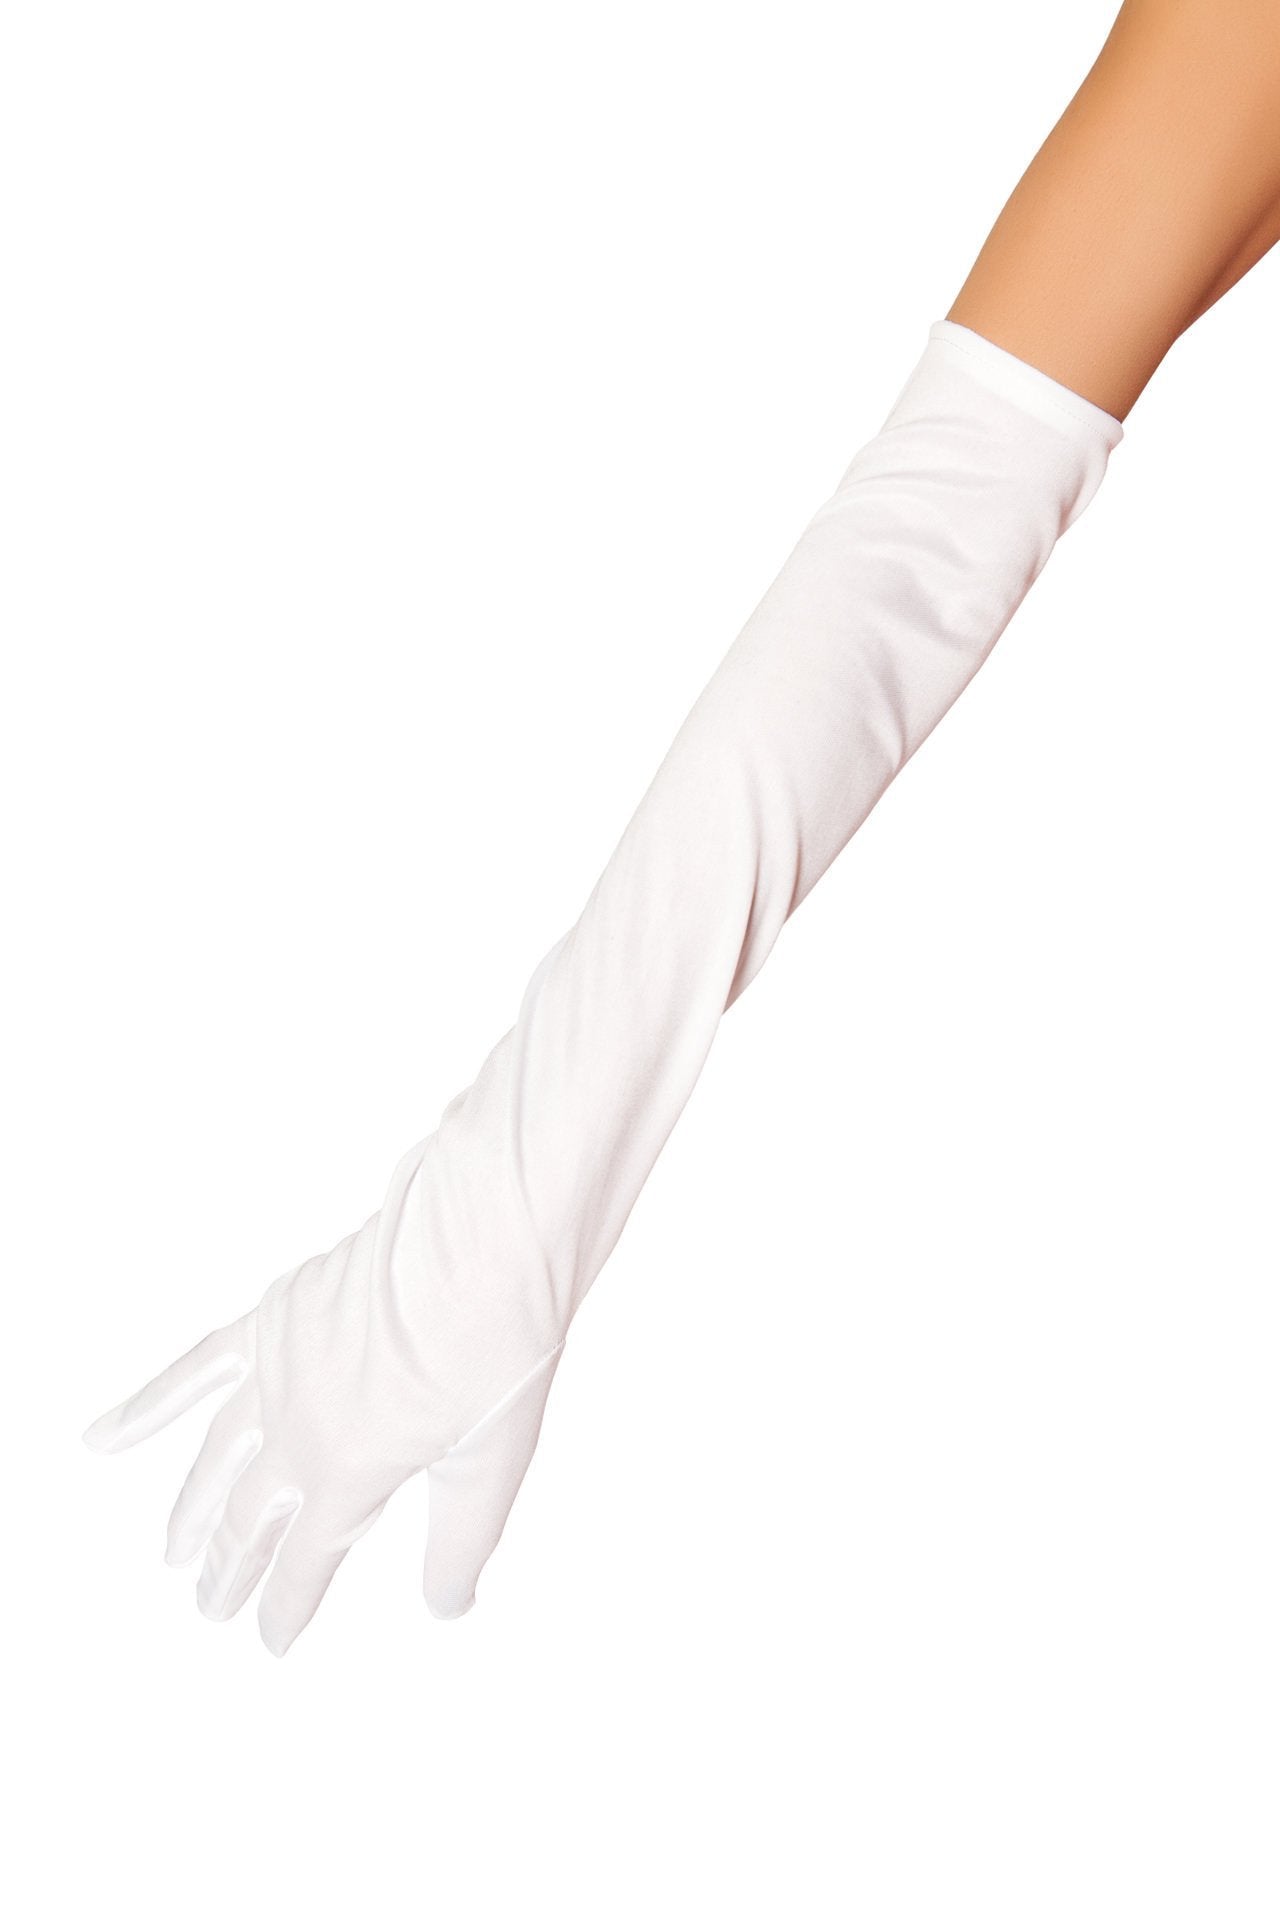 Buy Stretch Satin Gloves from RomaRetailShop for 5.62 with Same Day Shipping Designed by Roma Costume 10104-Wht-O/S